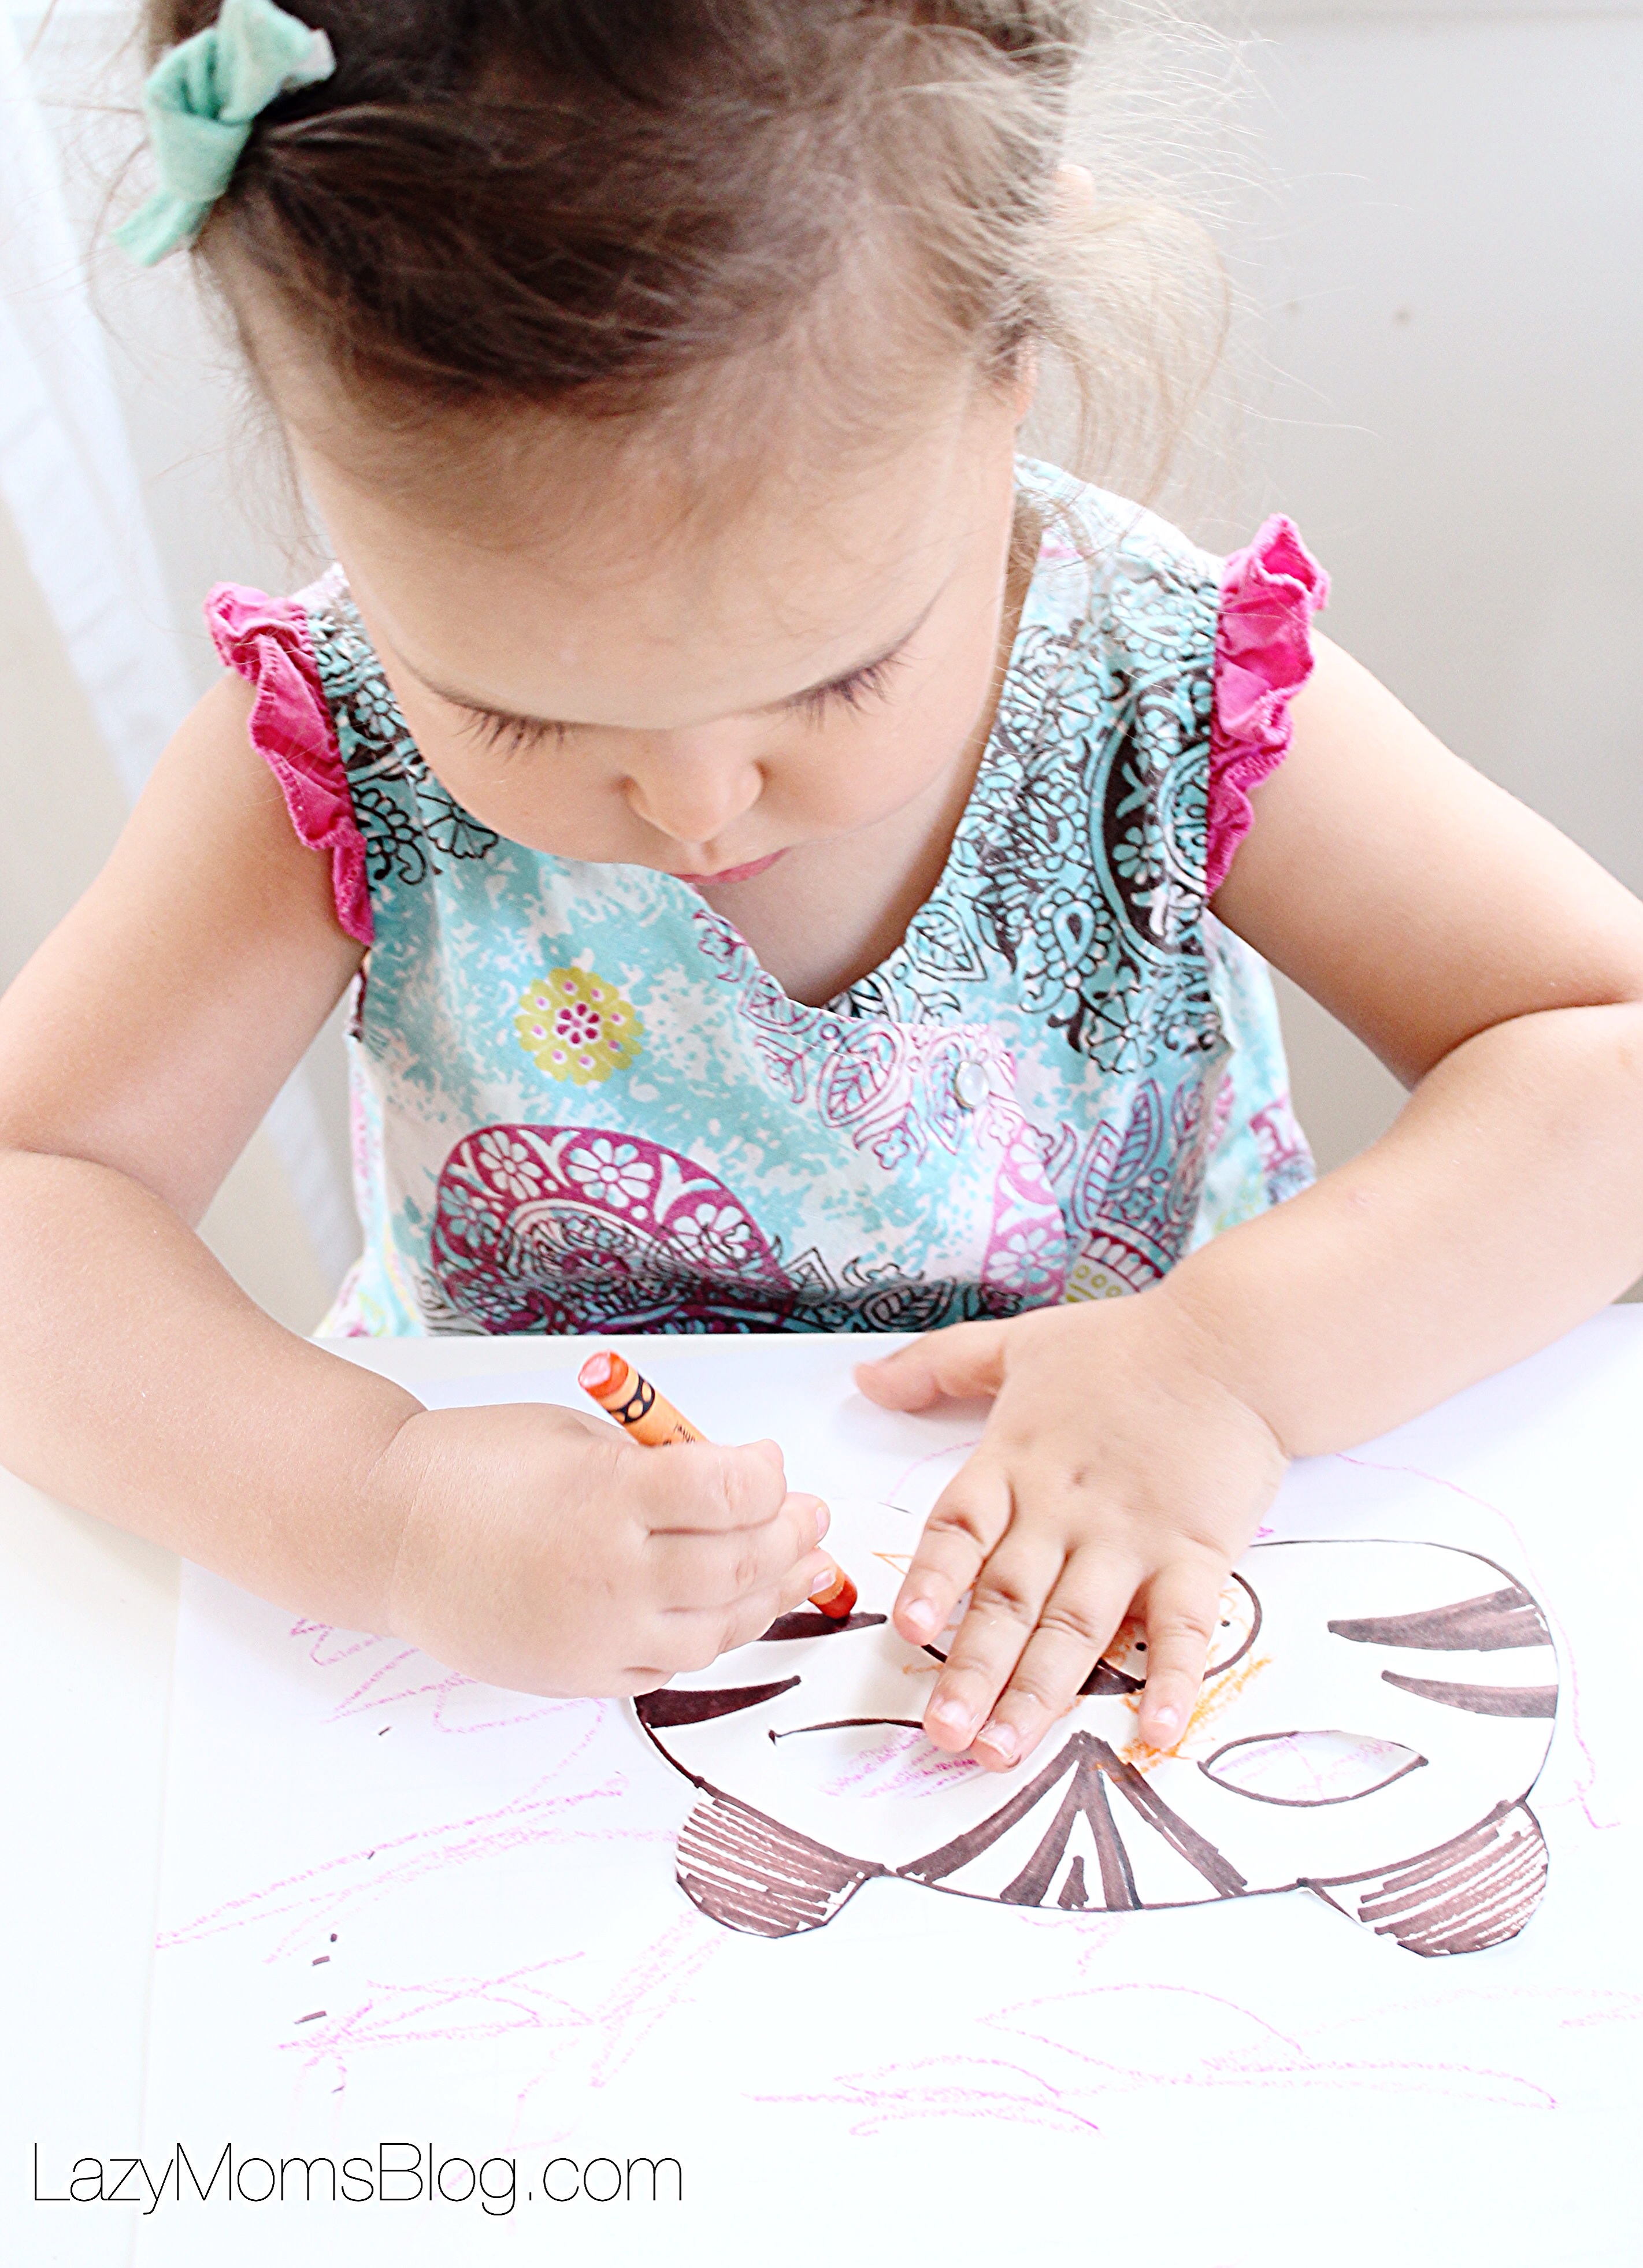 Series that inspires your kid to craft